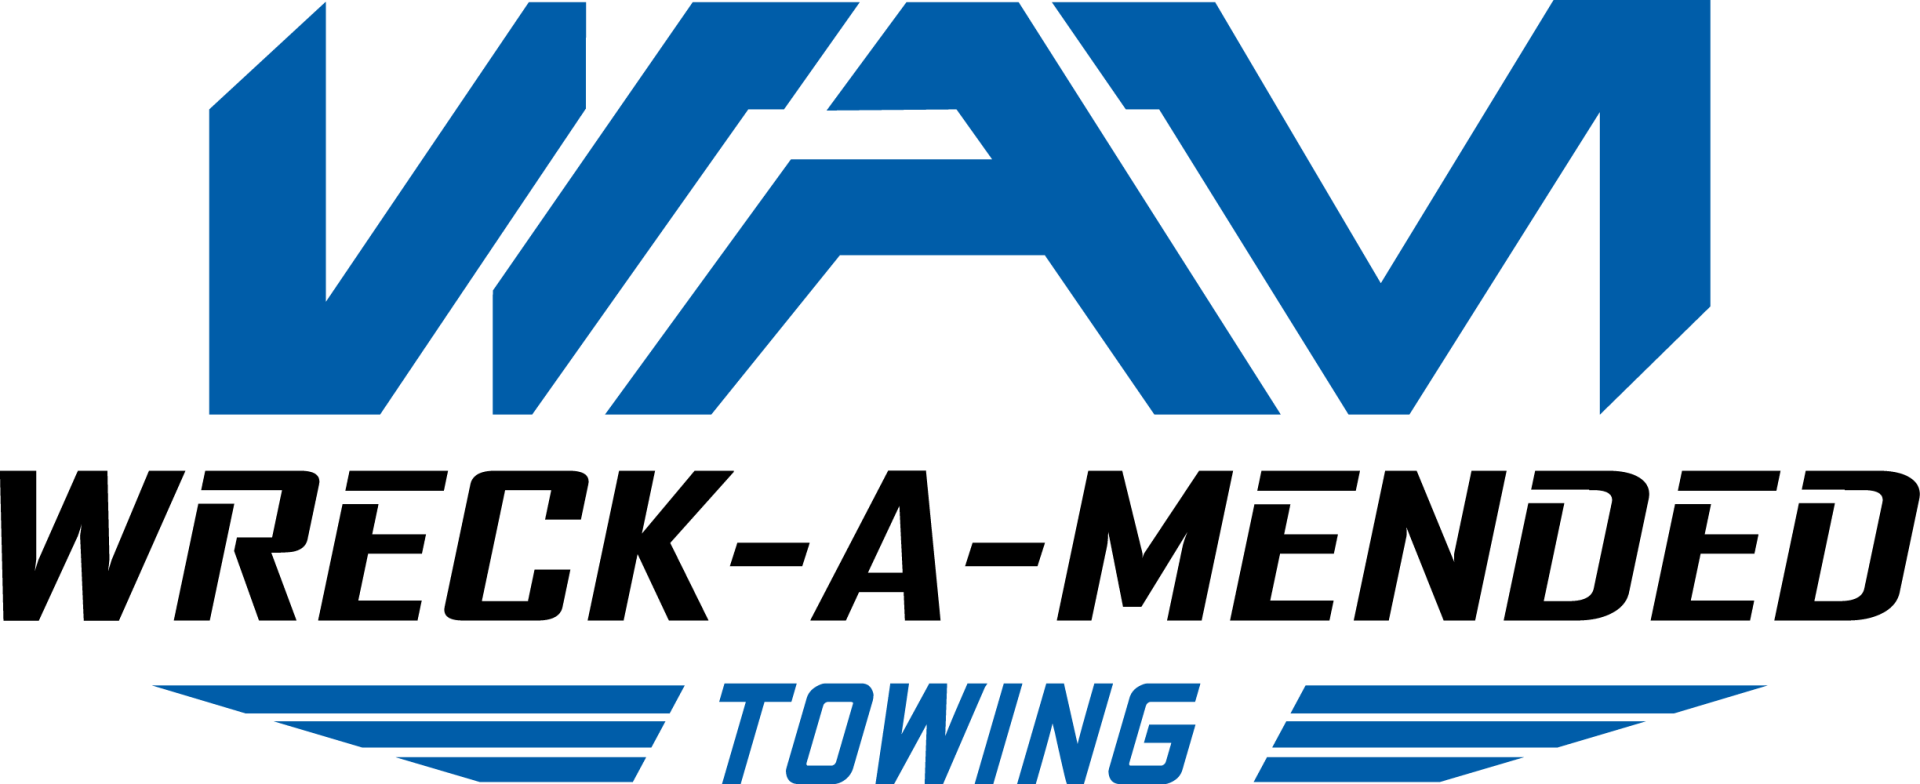 Wreckamended Towing & Road Services Houston, TX - Logo